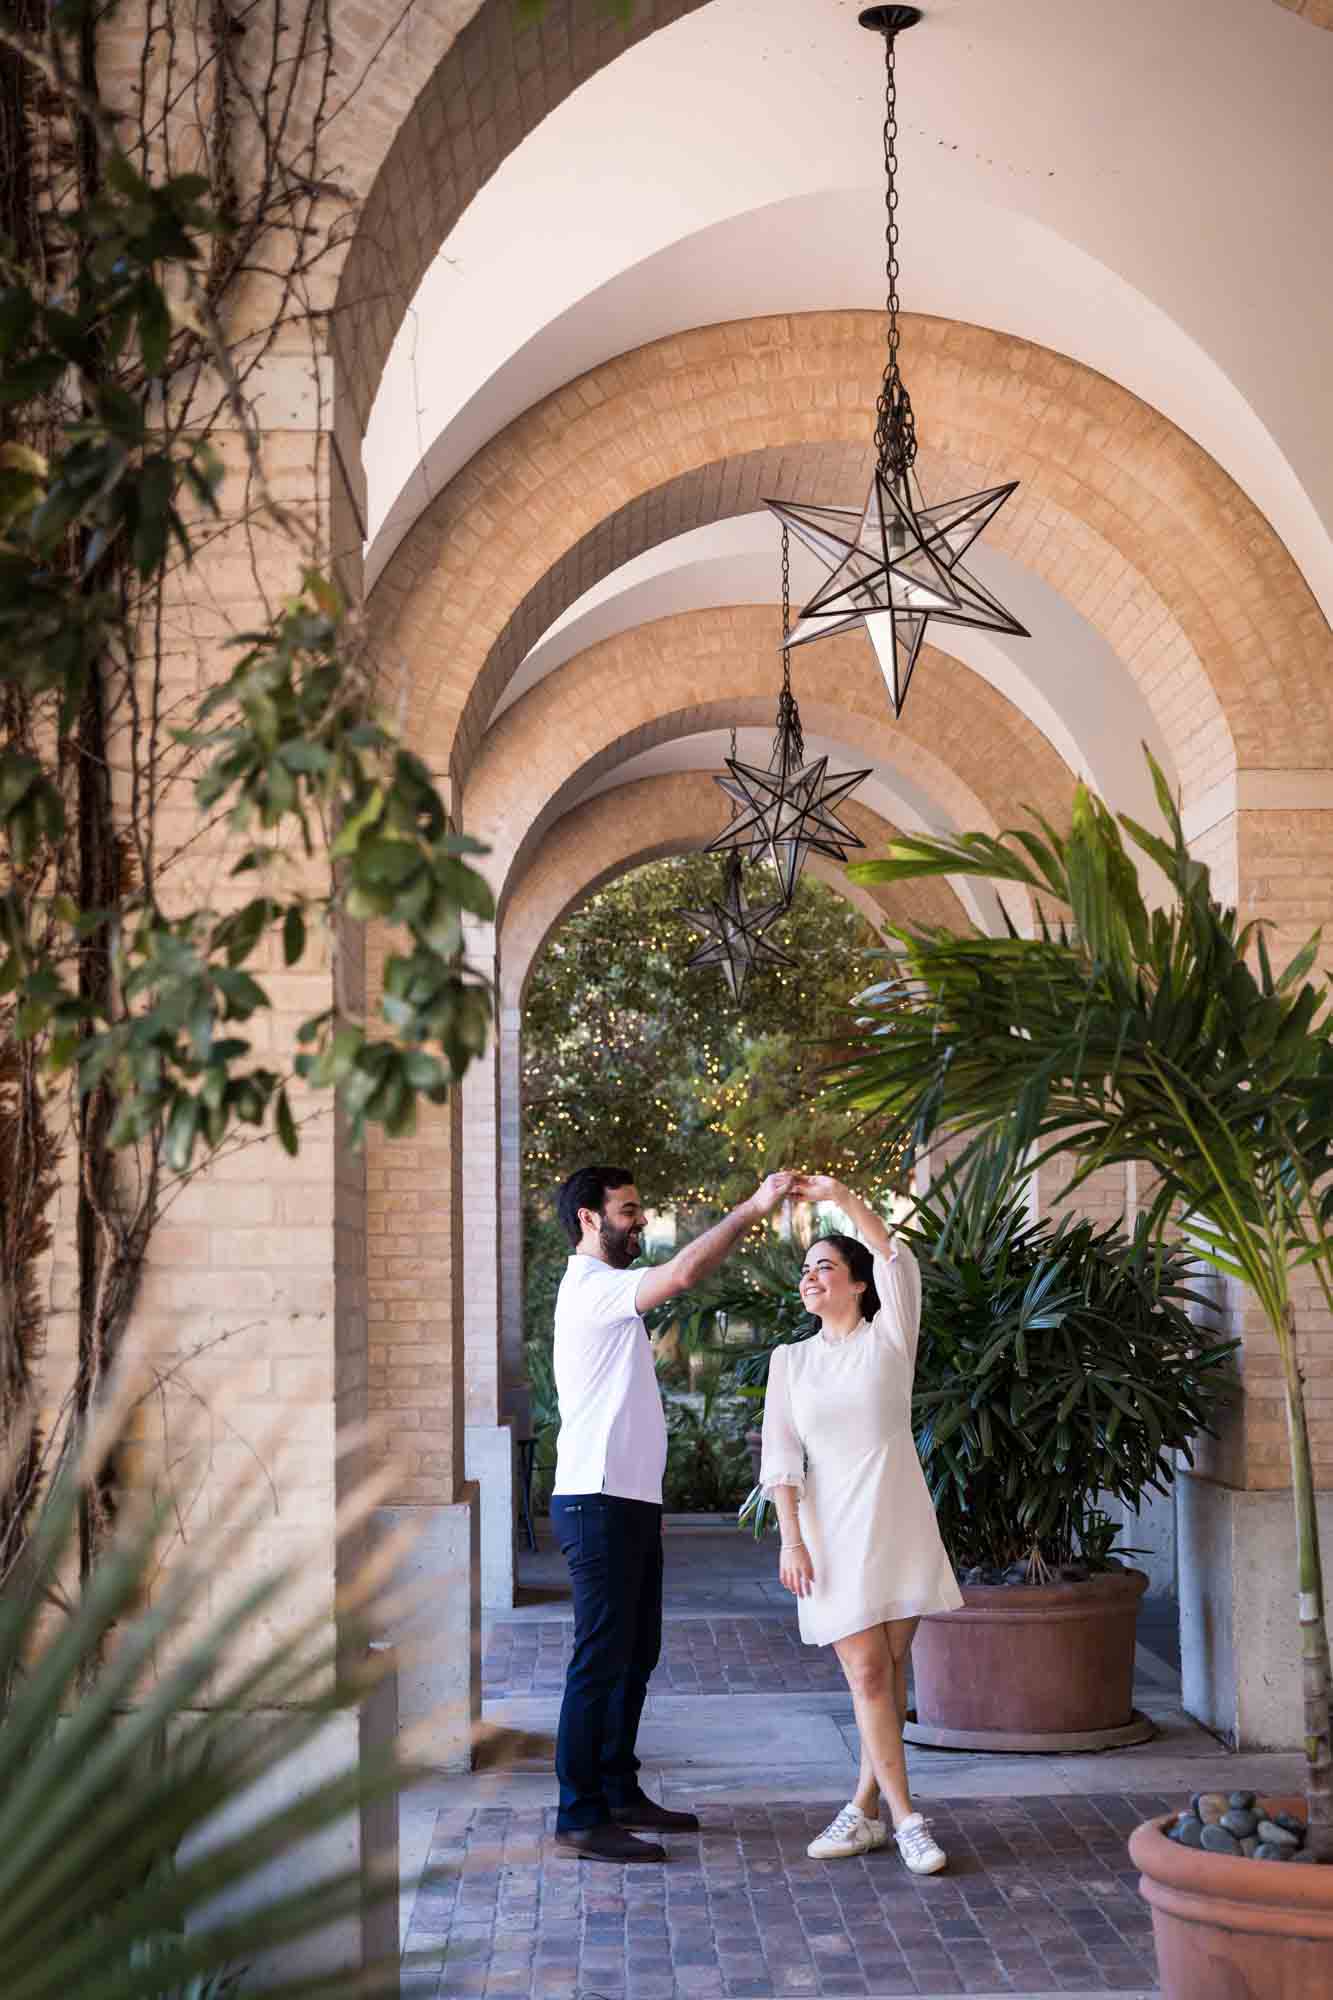 Couple dancing under brick archway with star-shaped lights during a Pearl engagement portrait session